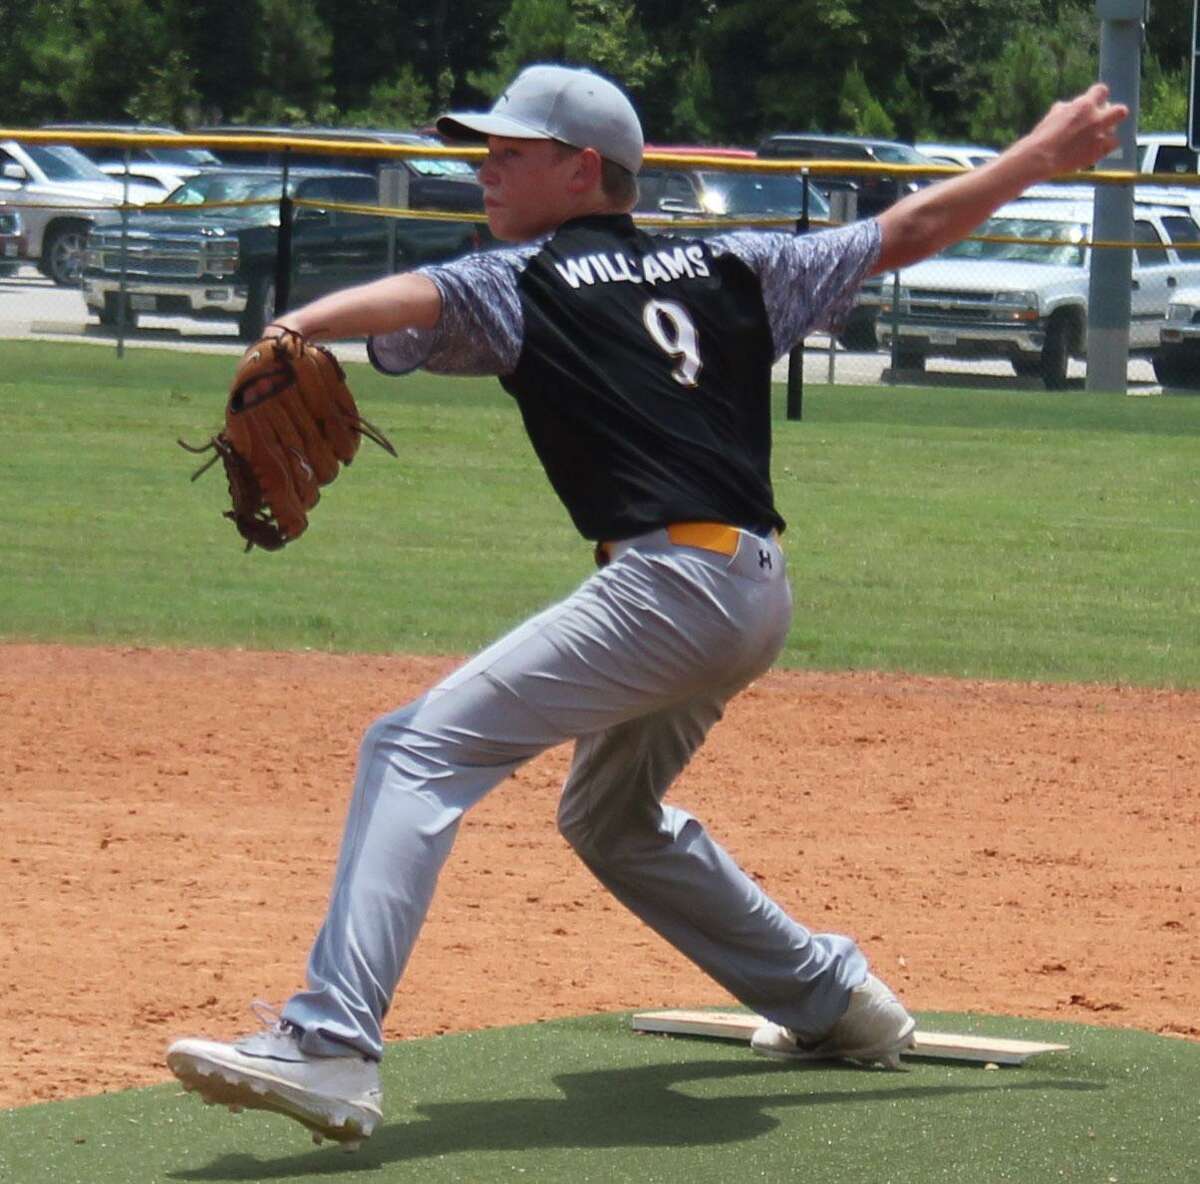 Carson Williams of the Liberty Majors All-Star team prepares to unleash a pitch to the Shepherd Majors team on June 23.